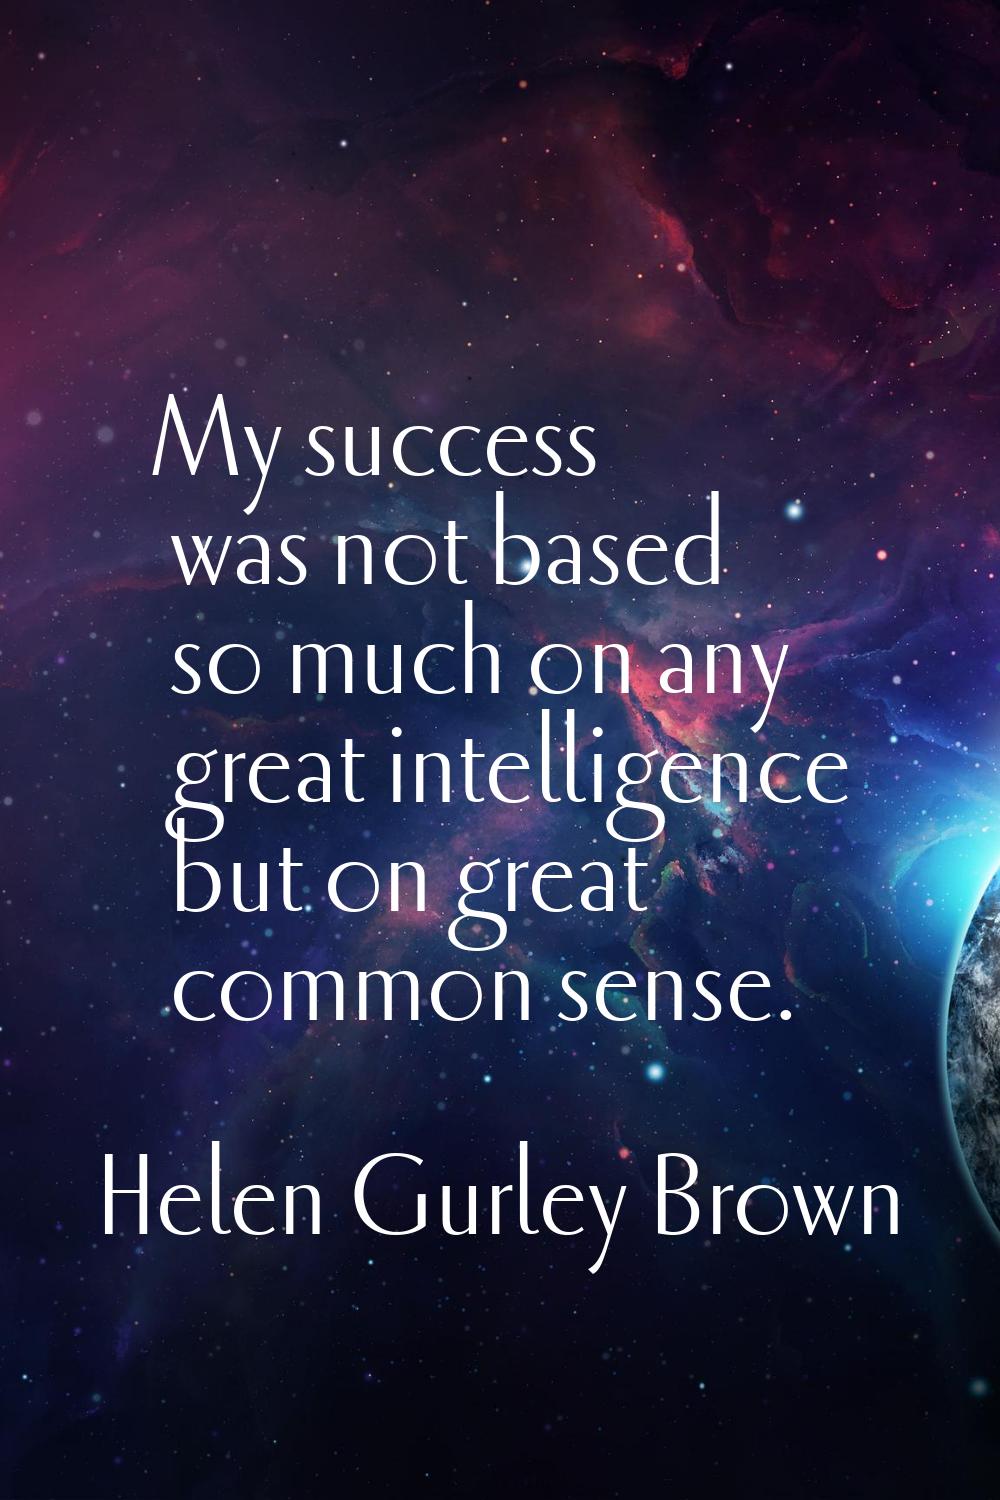 My success was not based so much on any great intelligence but on great common sense.